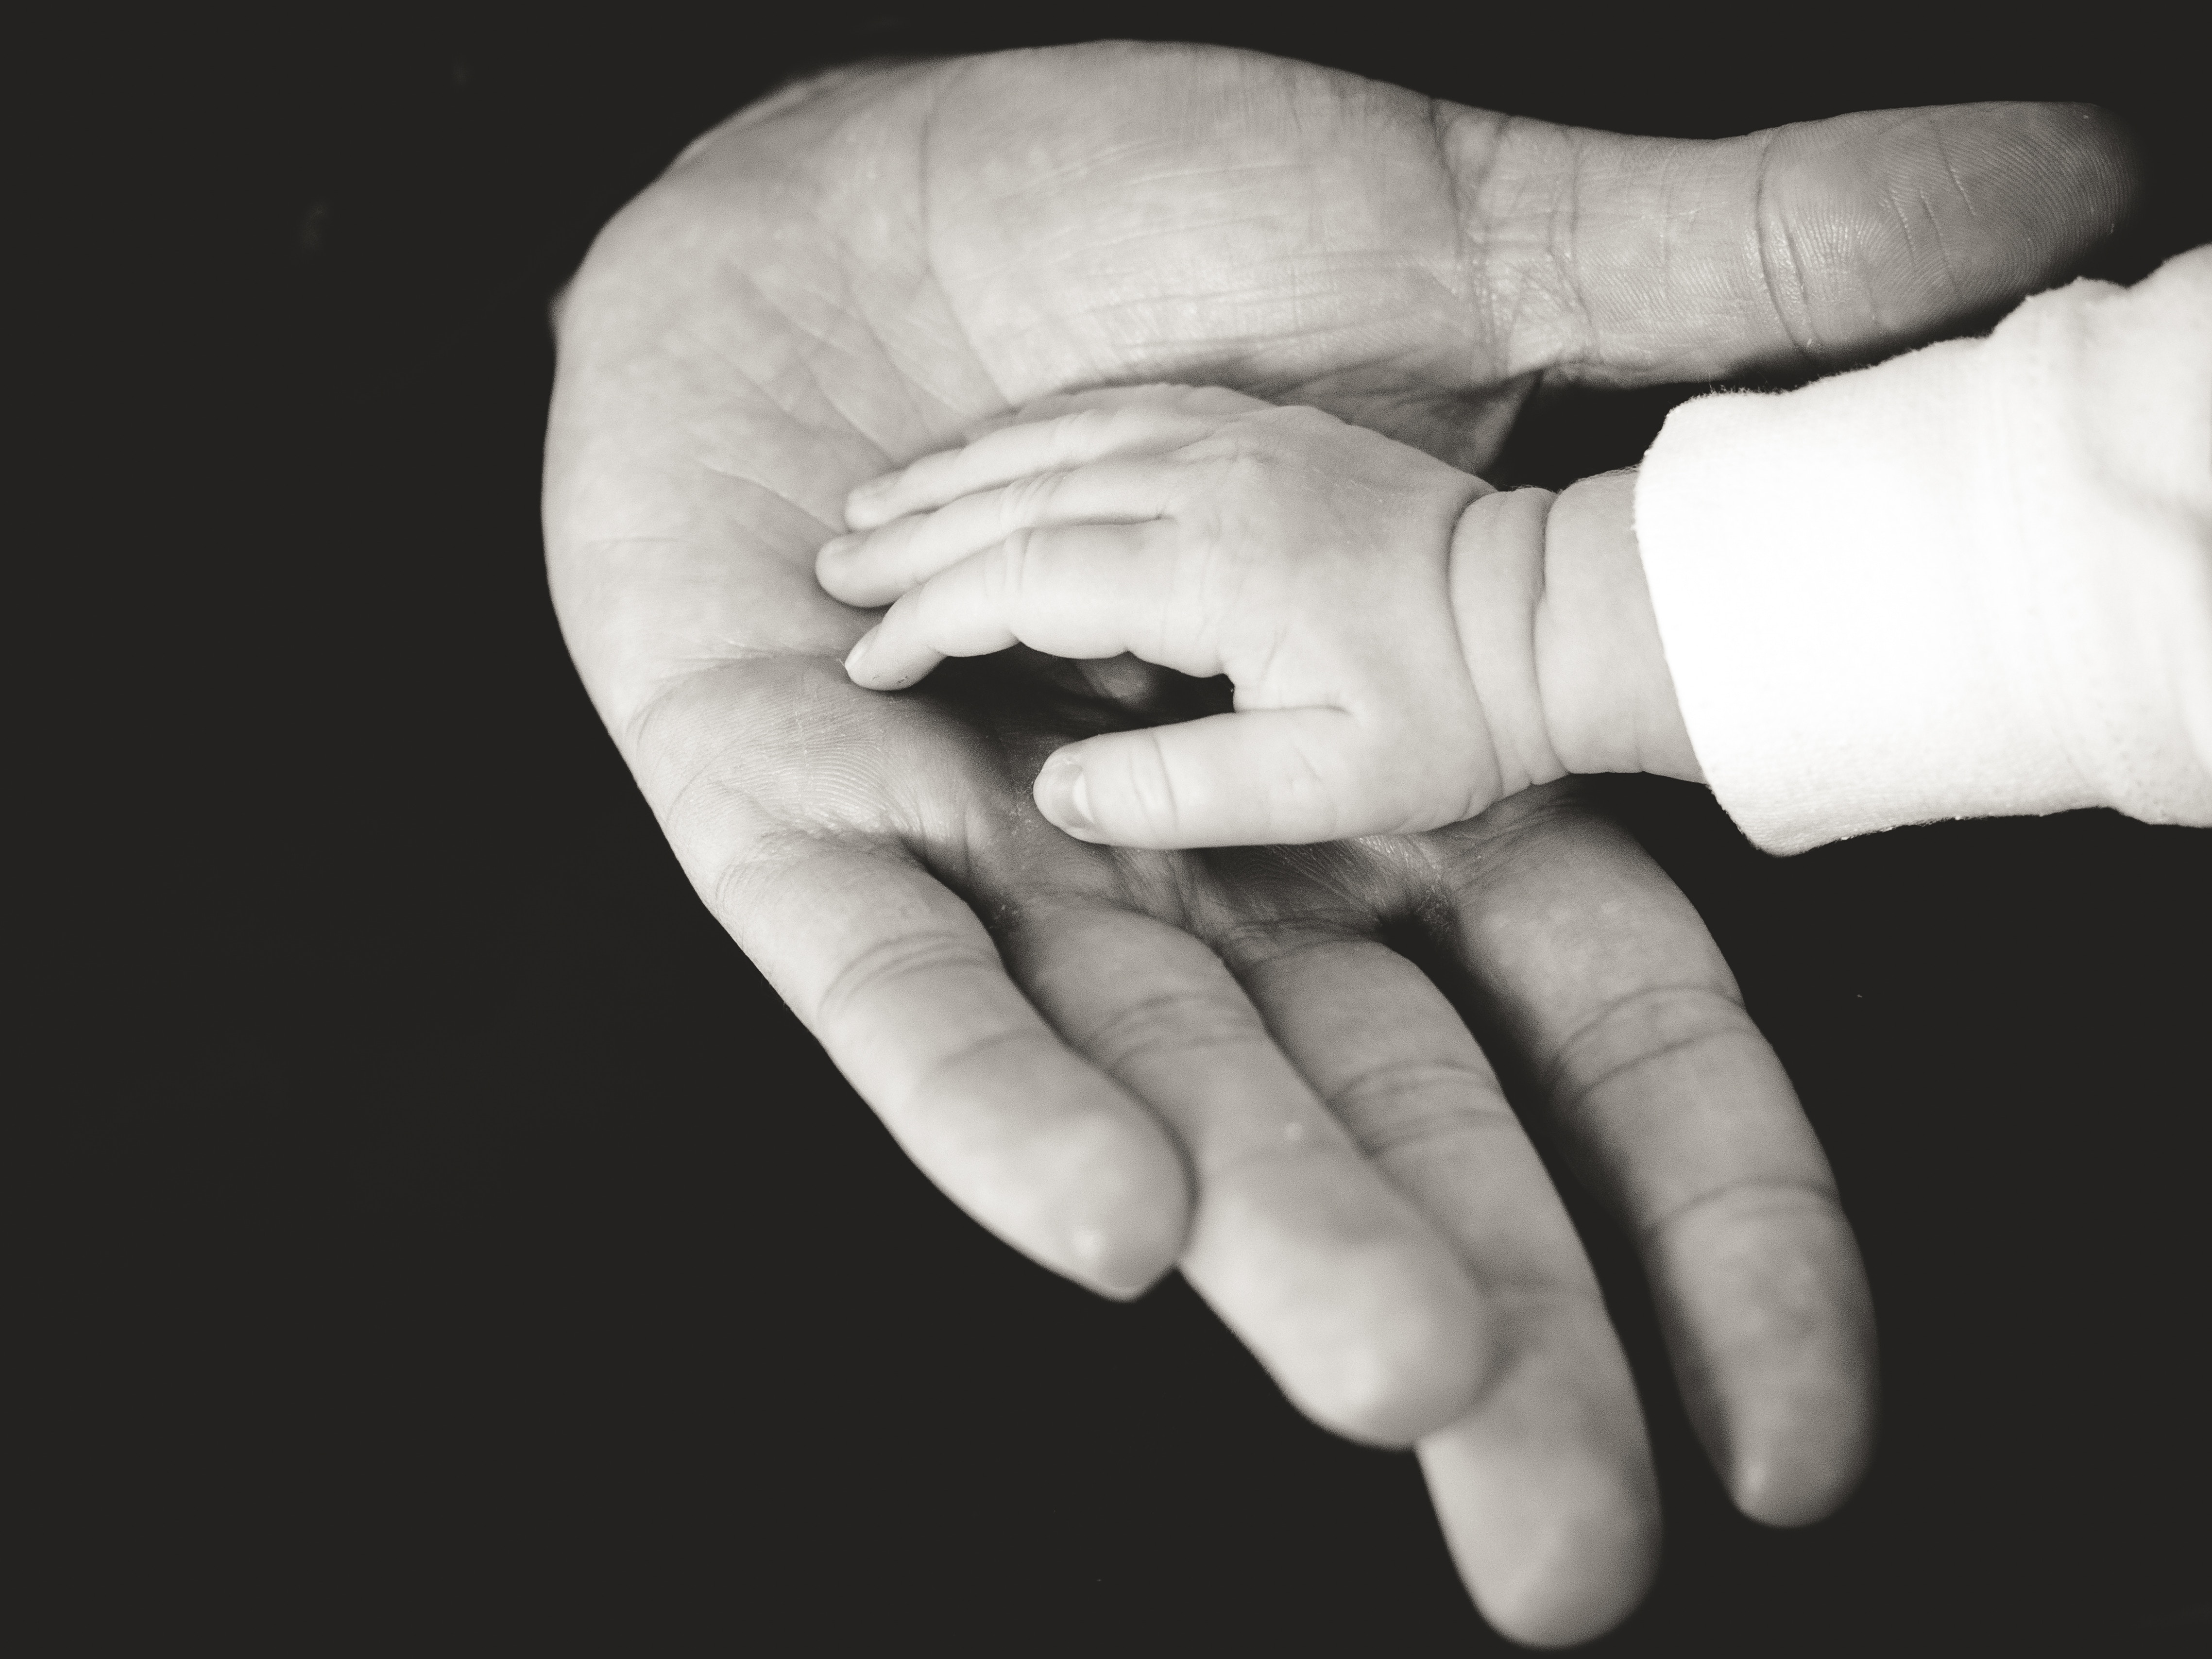 care, family, parents, love, hands, bw, chb, tenderness, child